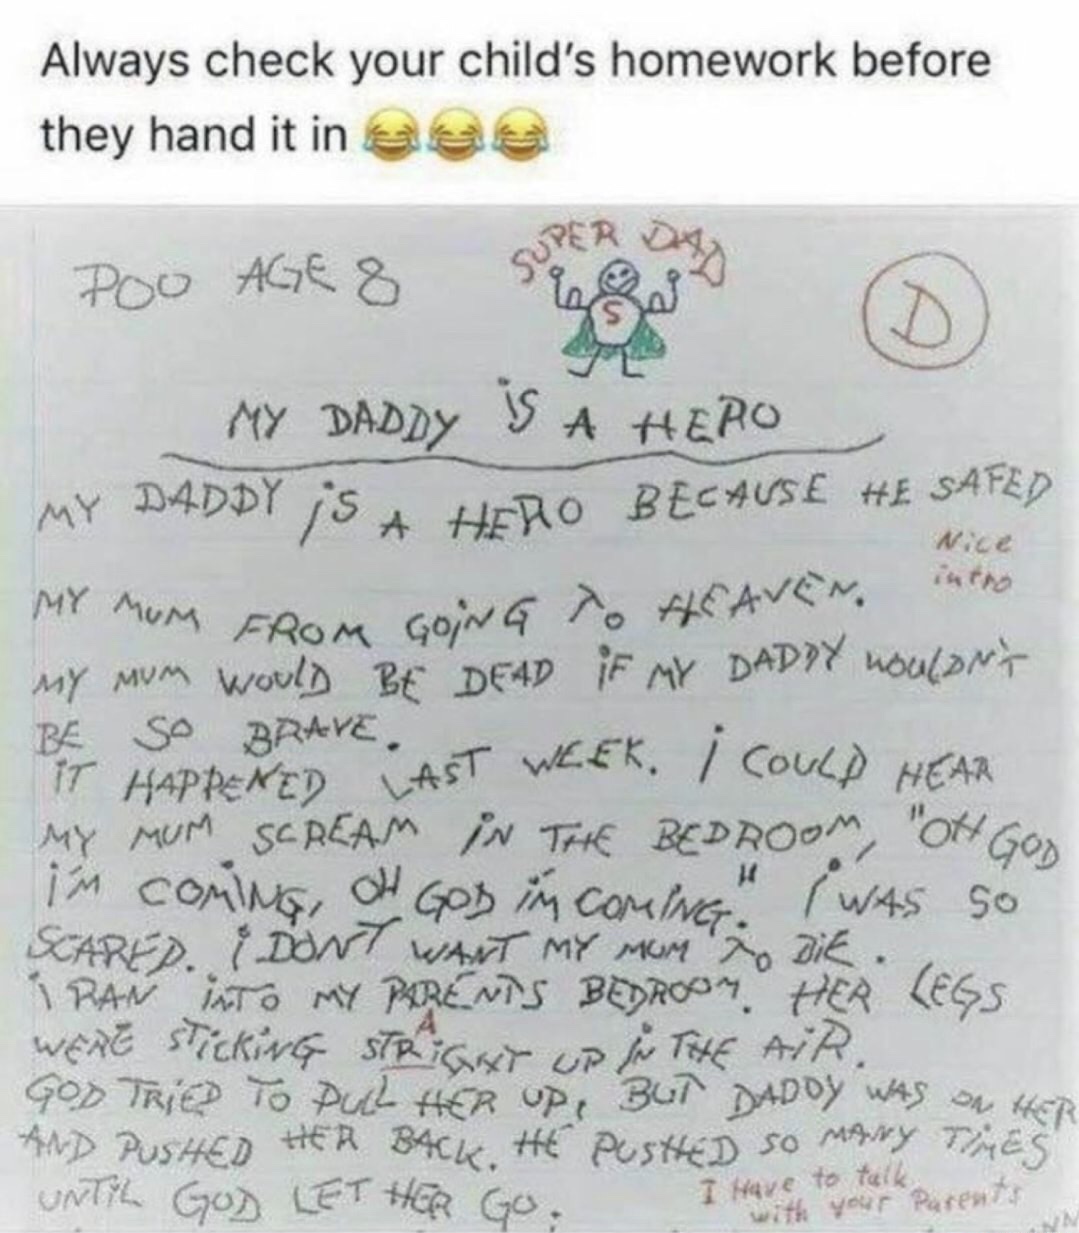 memes - always check your child's homework - Always check your child's homework before they hand it in Poo Age 8 Serie Nice My Daddy Is A Hero My Daddy 75 A Hiro Because He Safed M Mom From Going To Heaven. intro ich mom would Be Dead If My Daddy woulon's